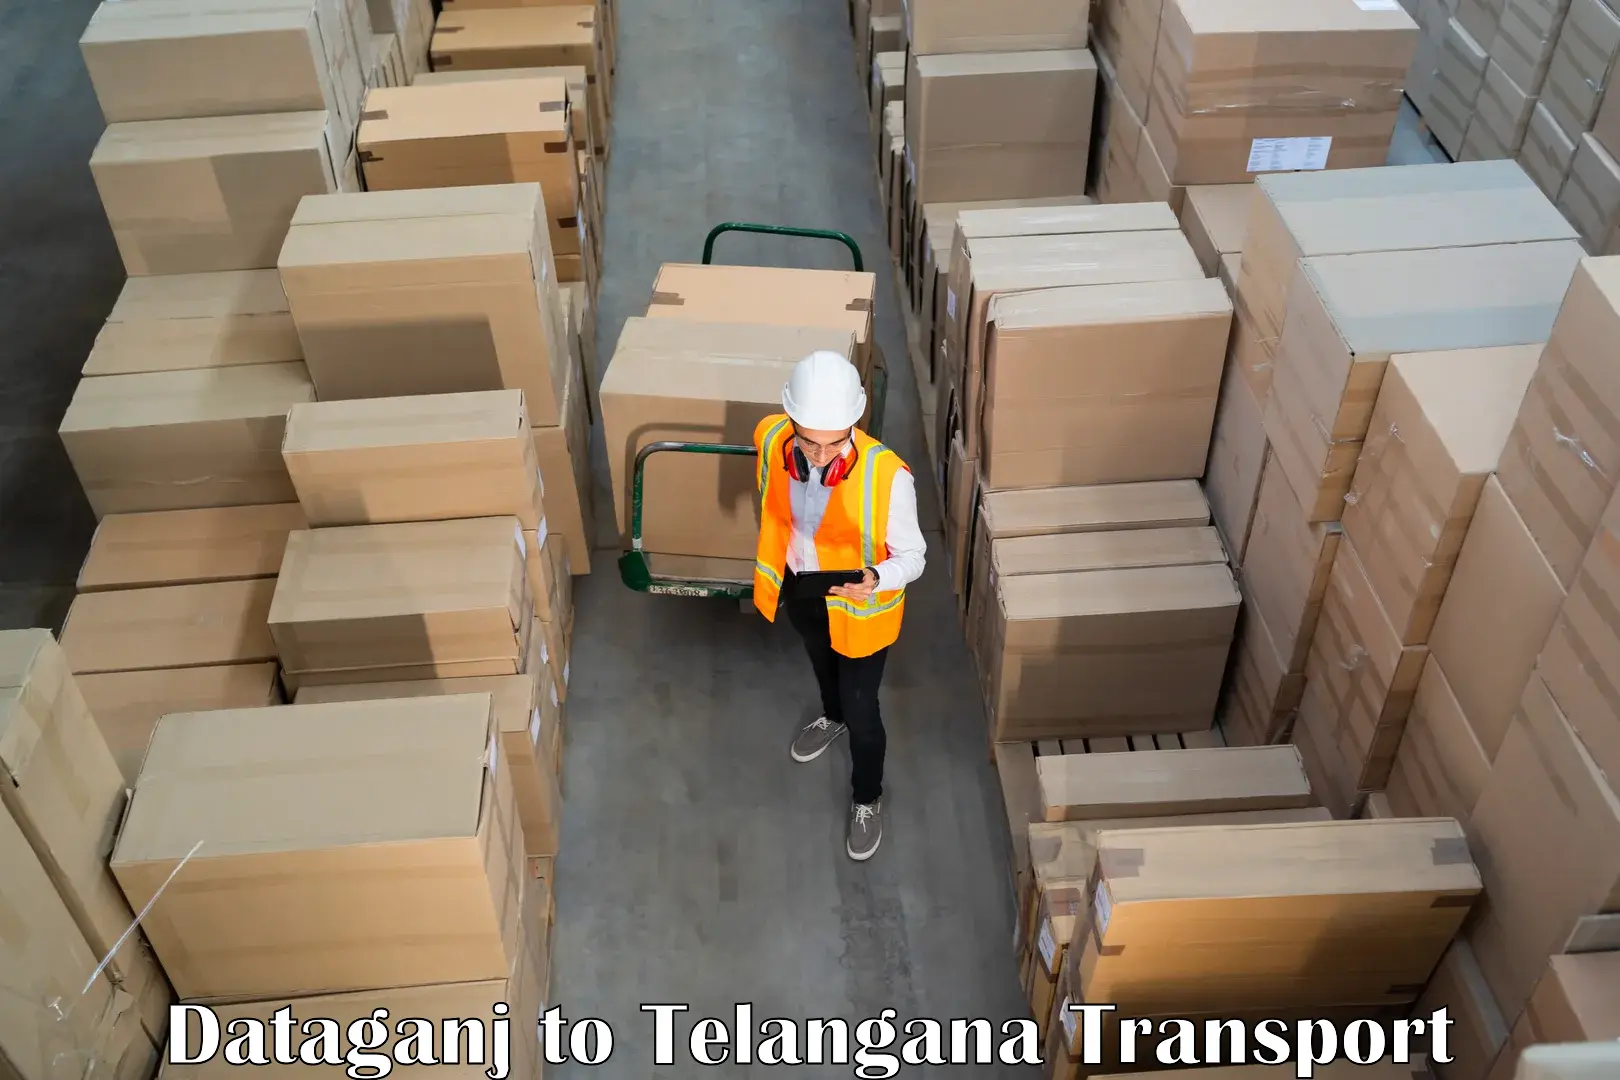 Express transport services in Dataganj to Mogulla Pally